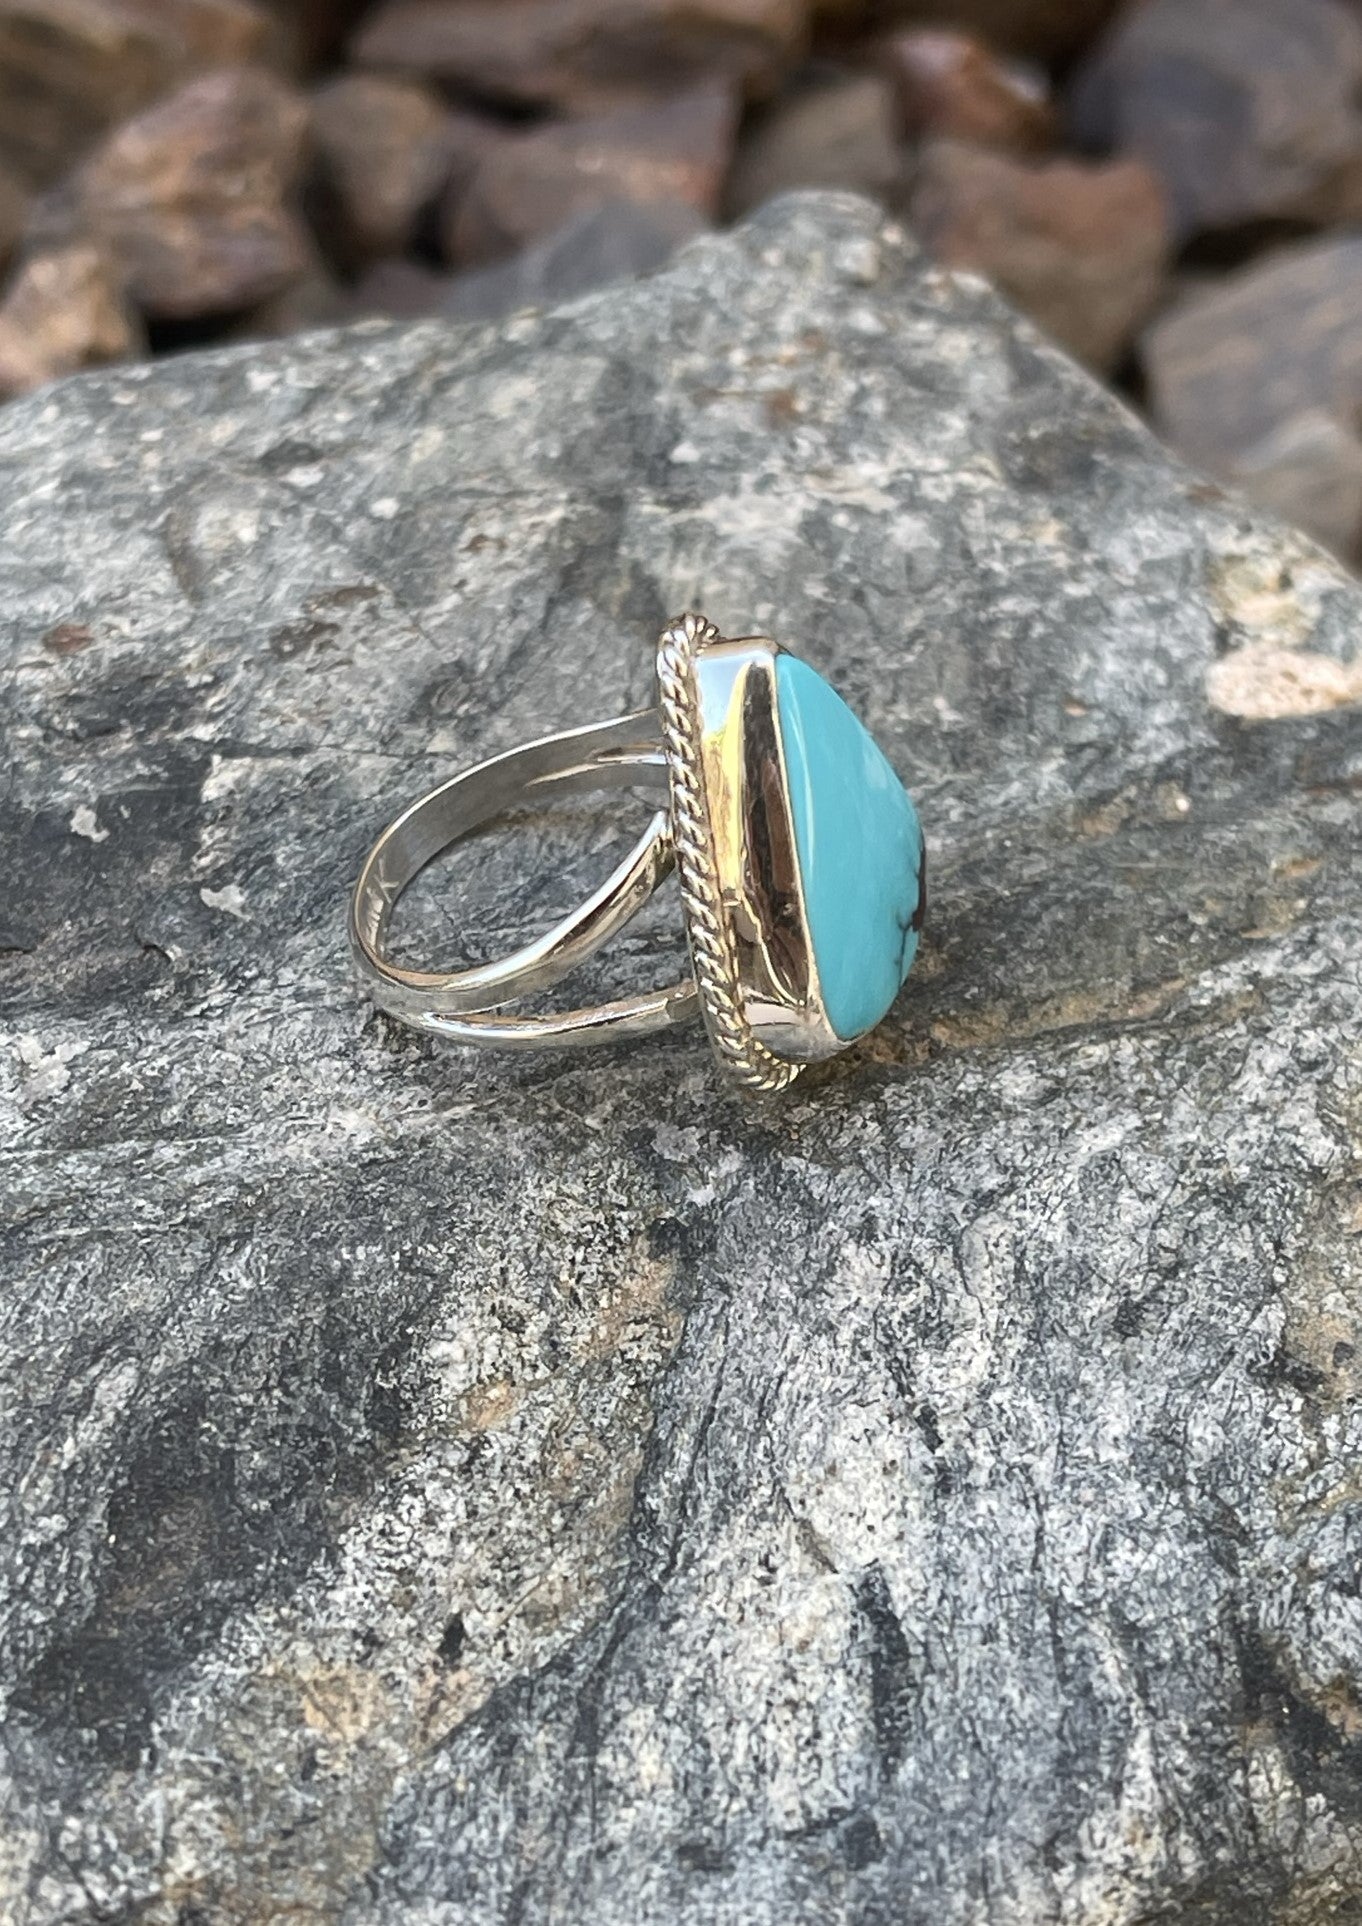 Handmade Sterling Silver Kingman Turquoise Ring with Twist Trim - Size 8 1/2